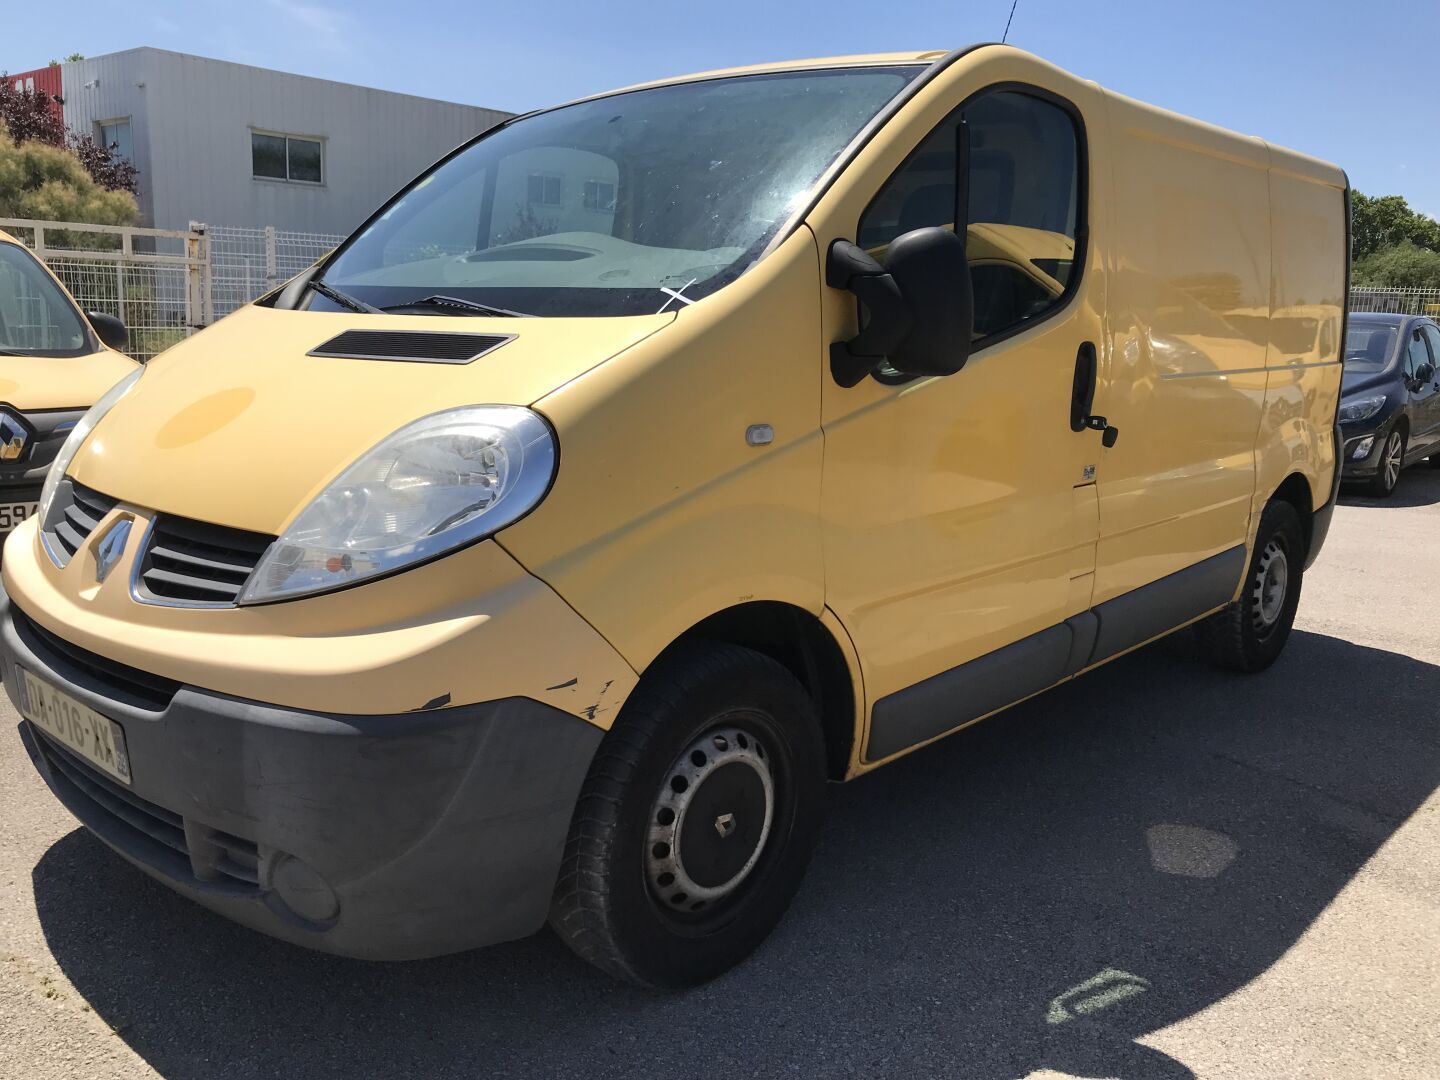 Null TRAFIC 2.0 DCI 90ch
CTTE RENAULT TRAFIC 2.0 DCI 90ch 2.0 DCI
Bodywork: FOUR&hellip;